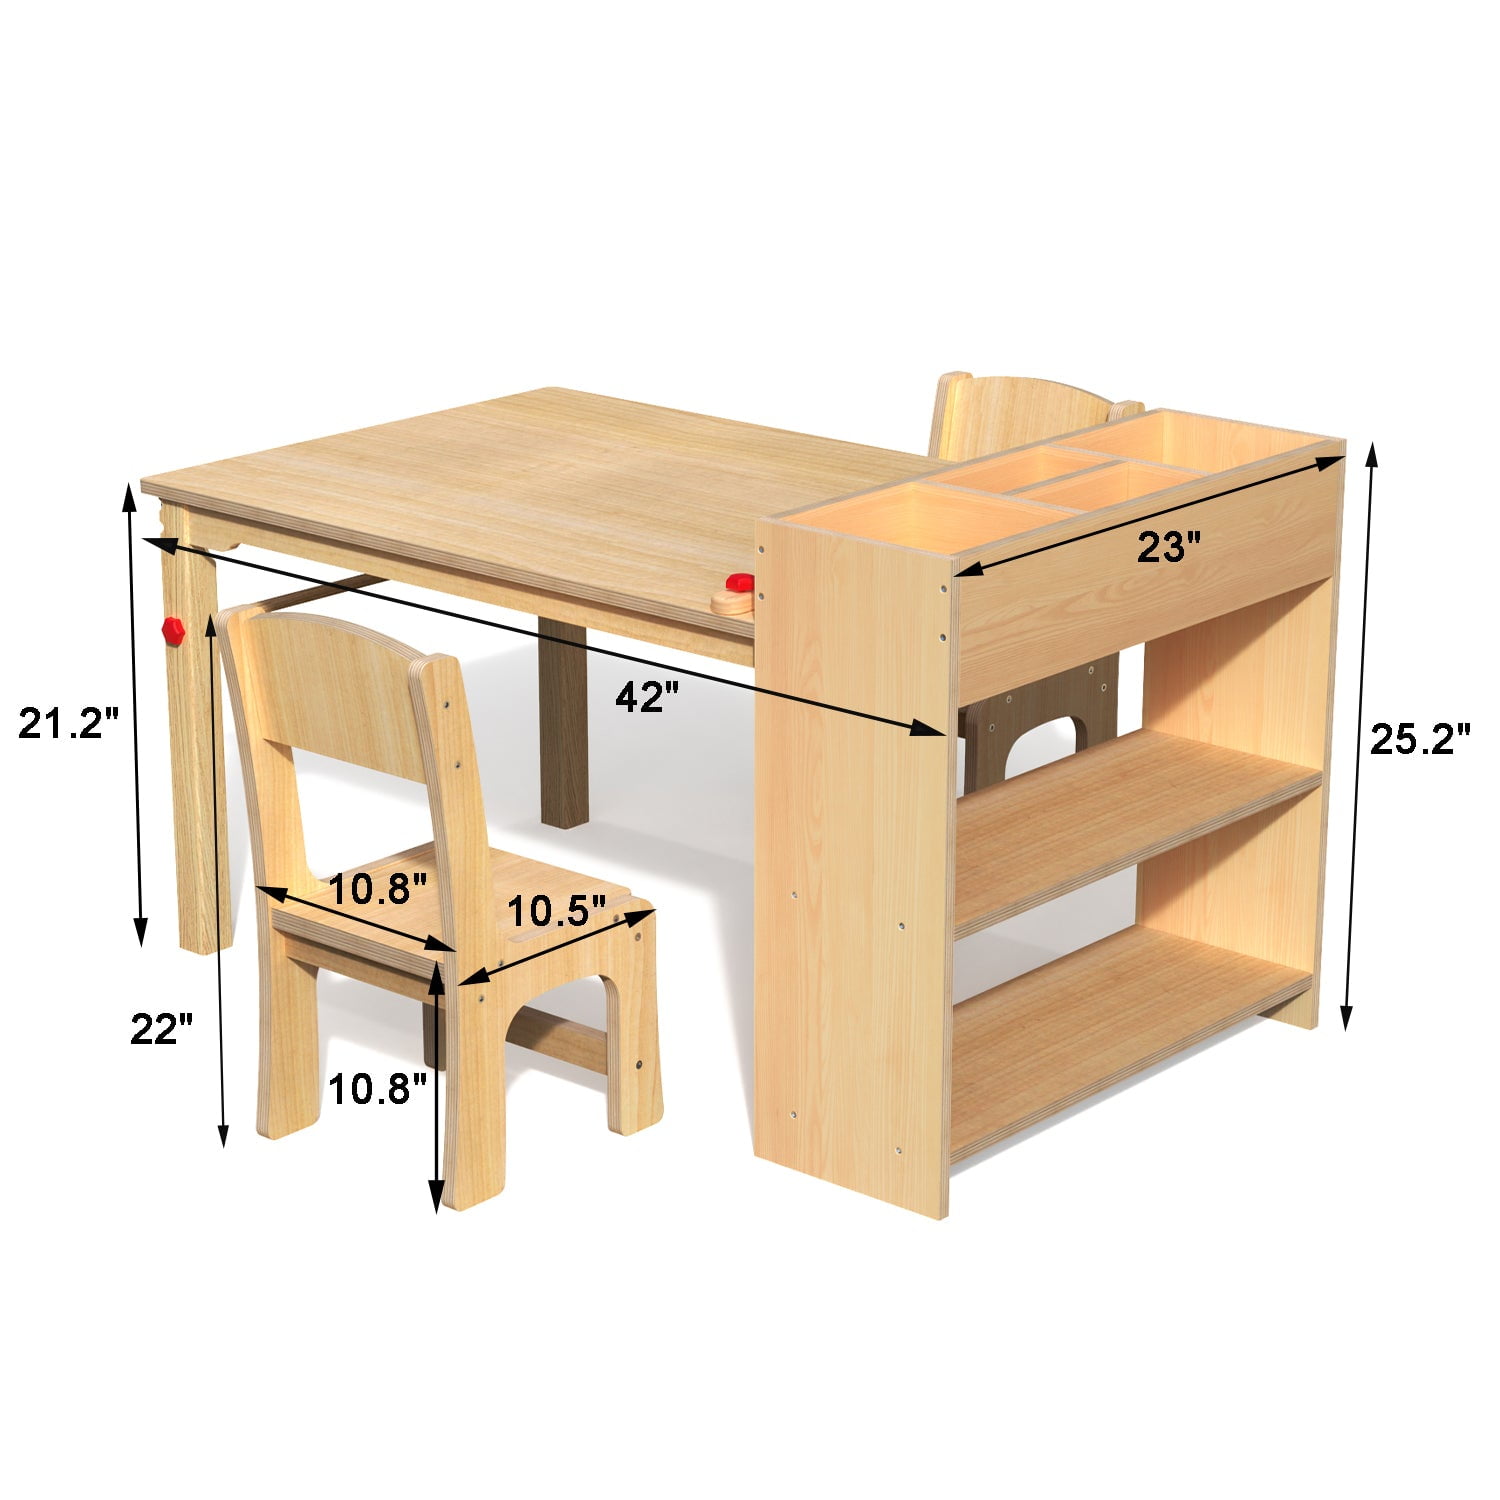 GDLF Kids Art Table and 2 Chairs, Wooden Drawing Desk, Activity